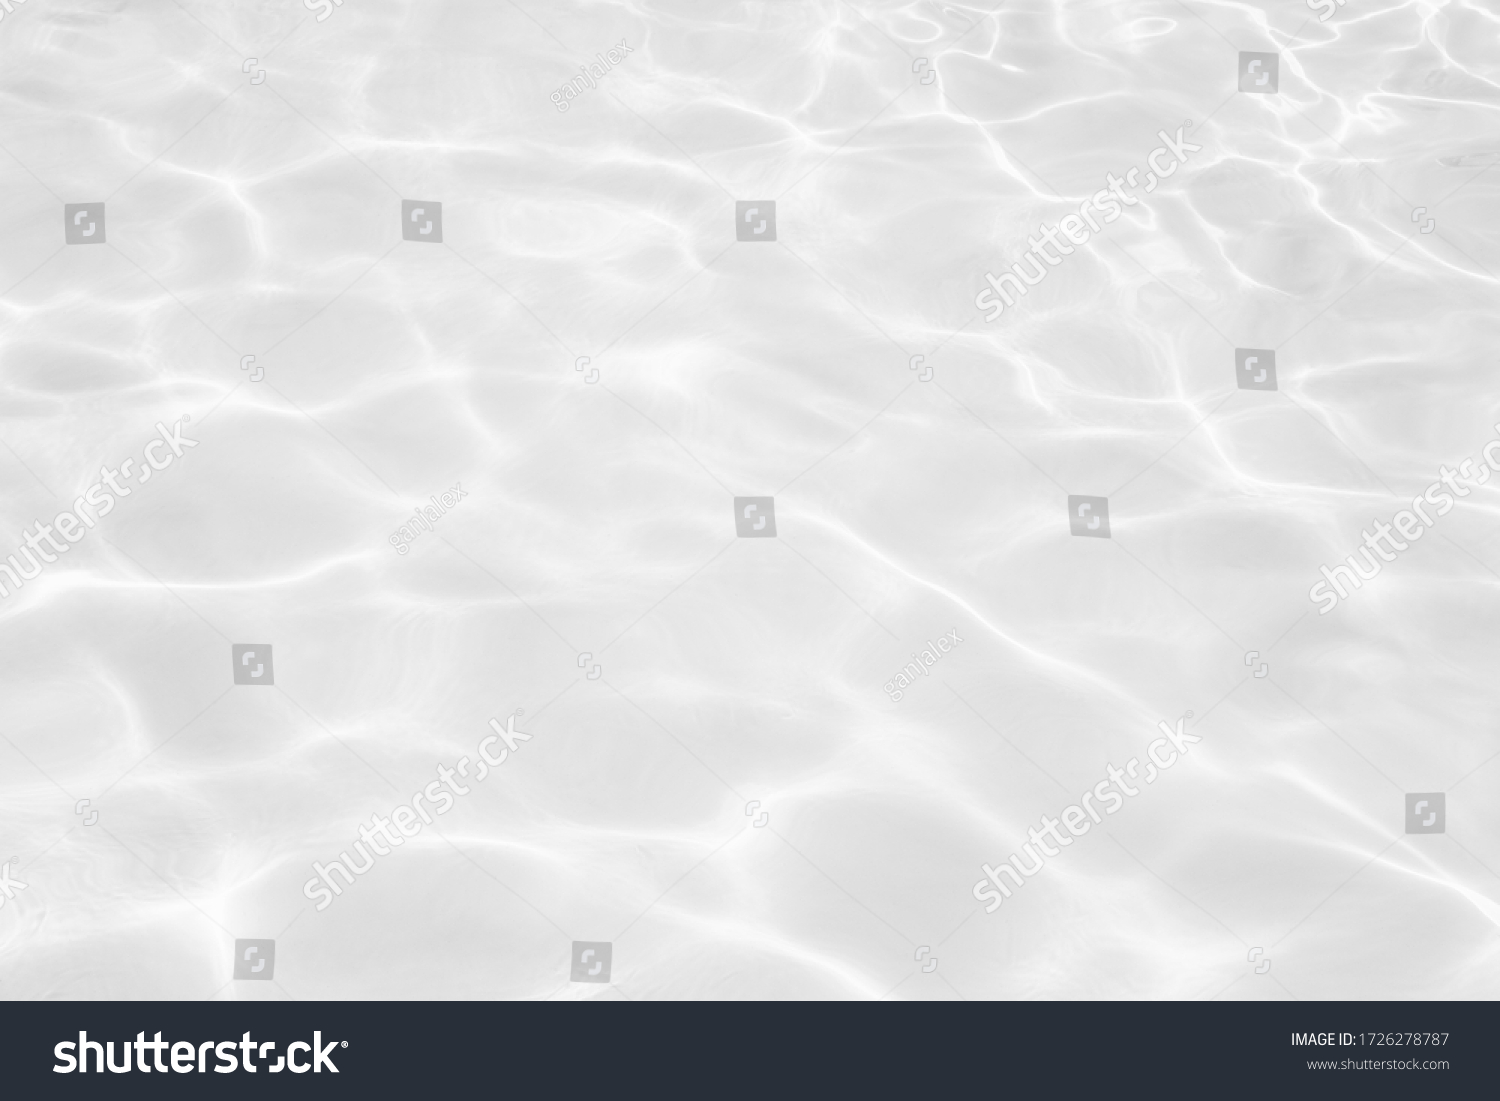 Closeup of desaturated transparent clear calm water surface texture with splashes and bubbles. Trendy abstract nature background.  #1726278787